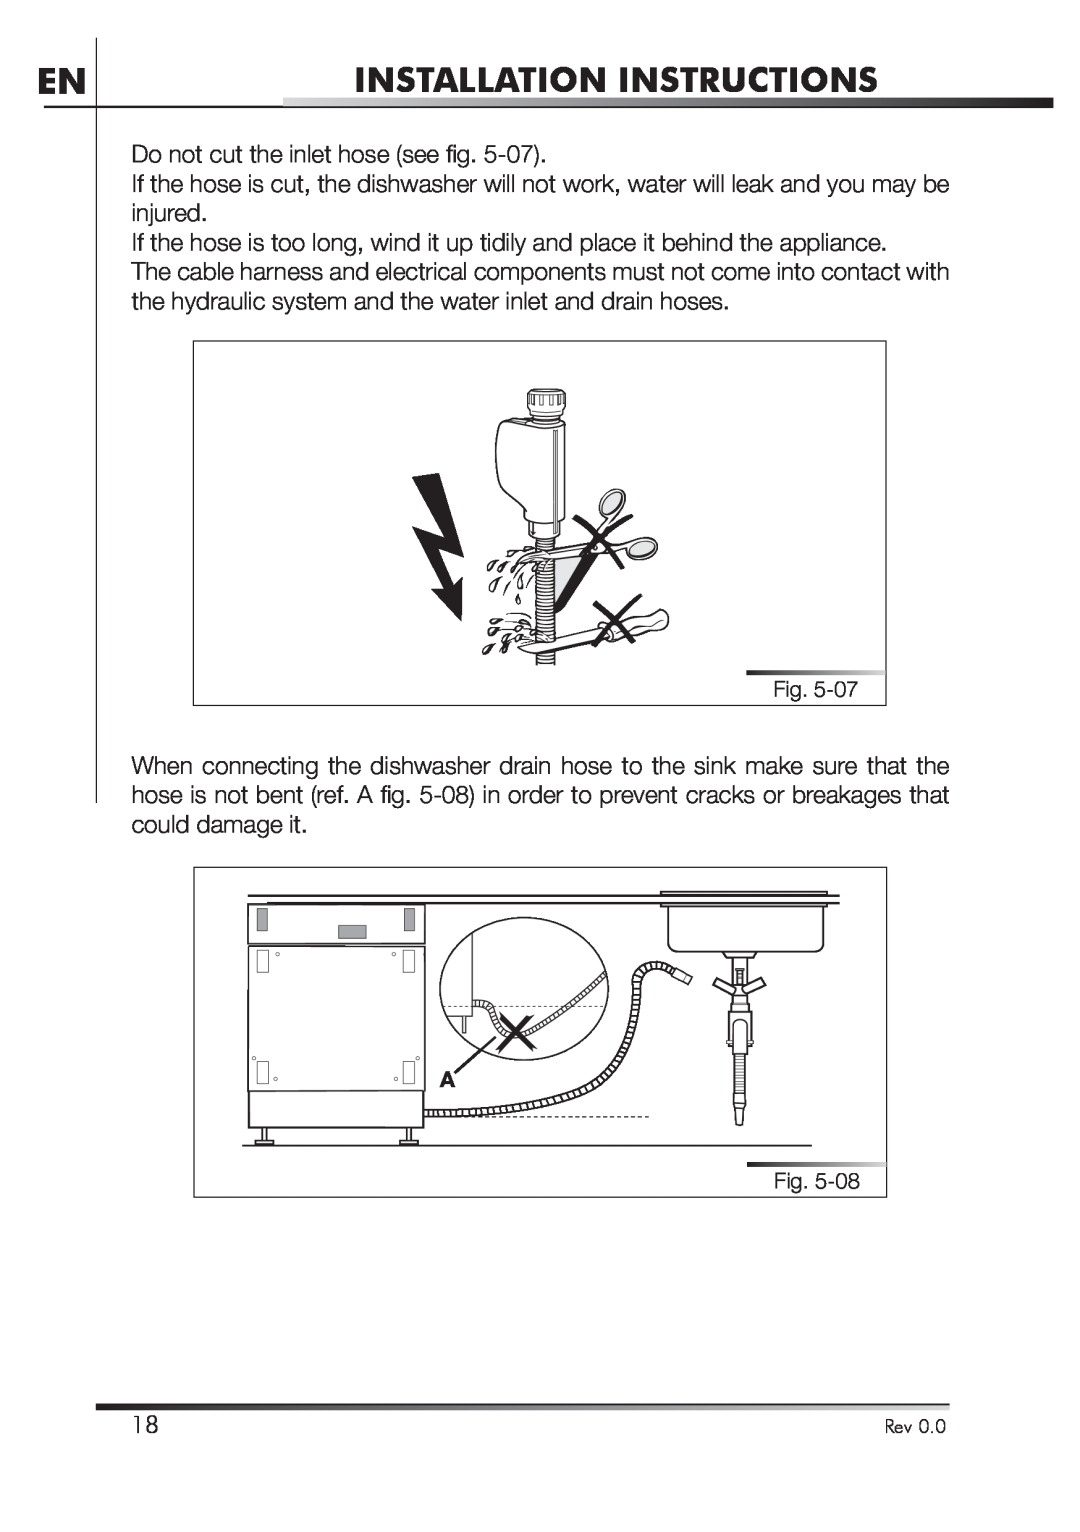 Smeg STA4645U manual Installation Instructions, Do not cut the inlet hose see ﬁ g 